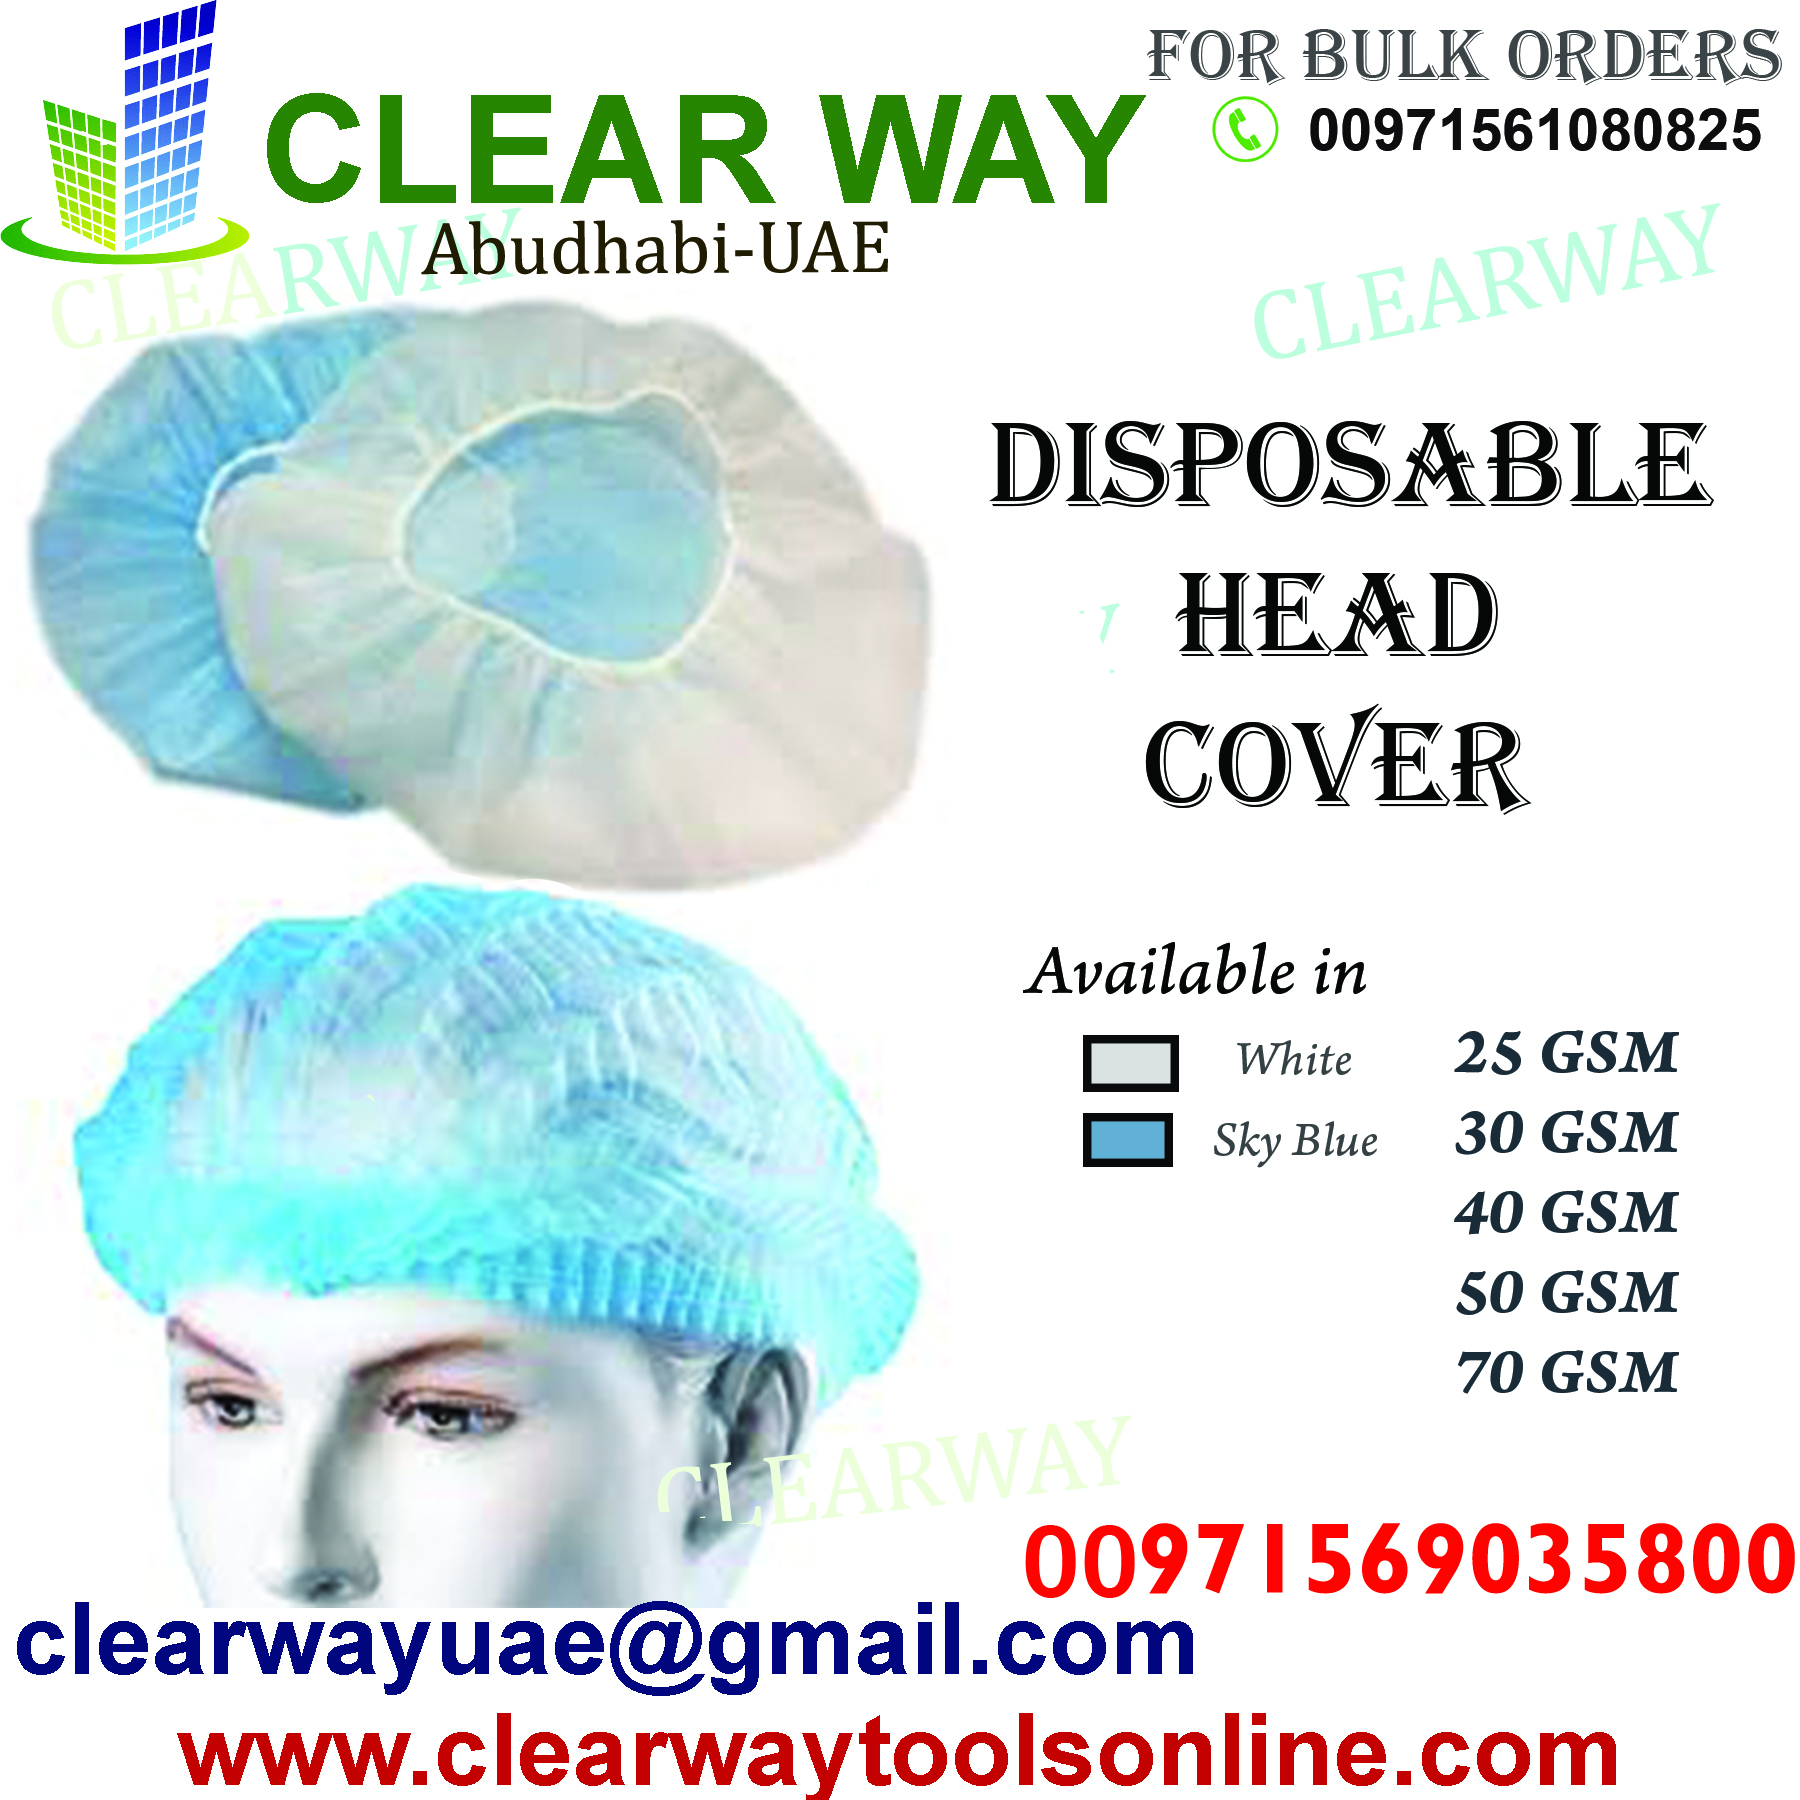 DISPOSABLE HEAD COVER DEALER IN MUSSAFAH , ABUDHABI , UAE BY CLEARWAY